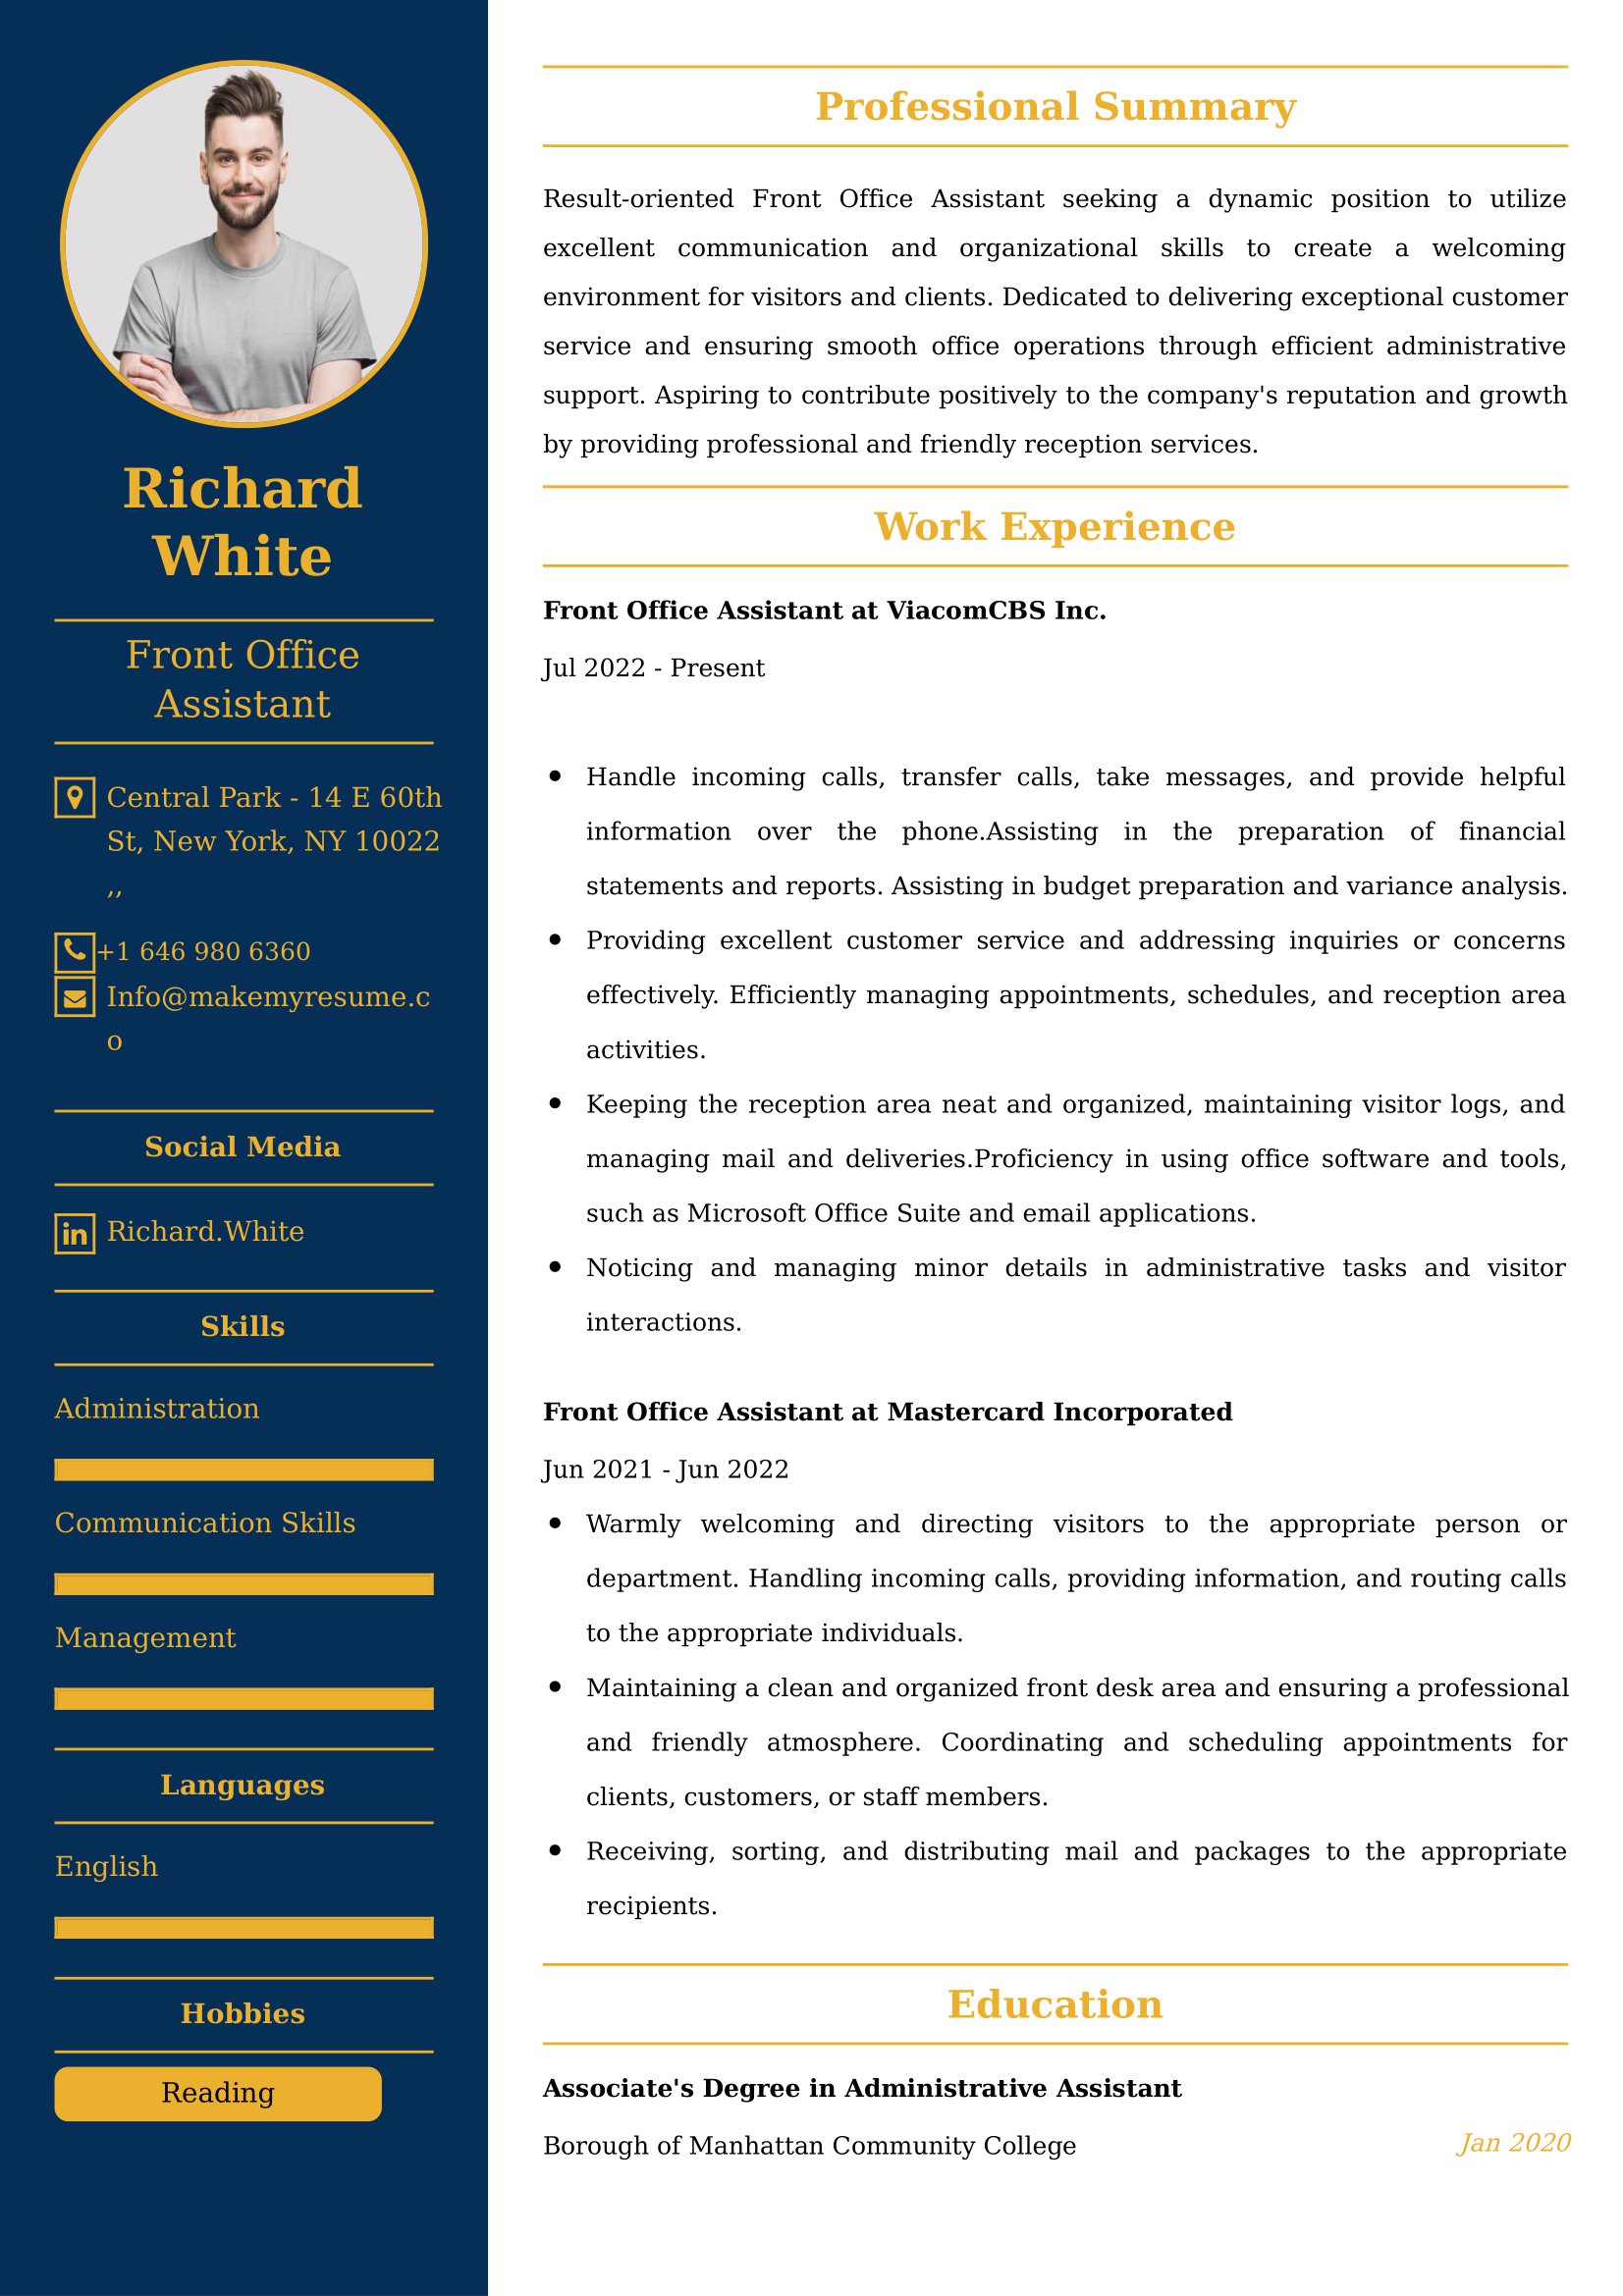 Front Office Assistant Resume Examples - UK Format, Latest Template.